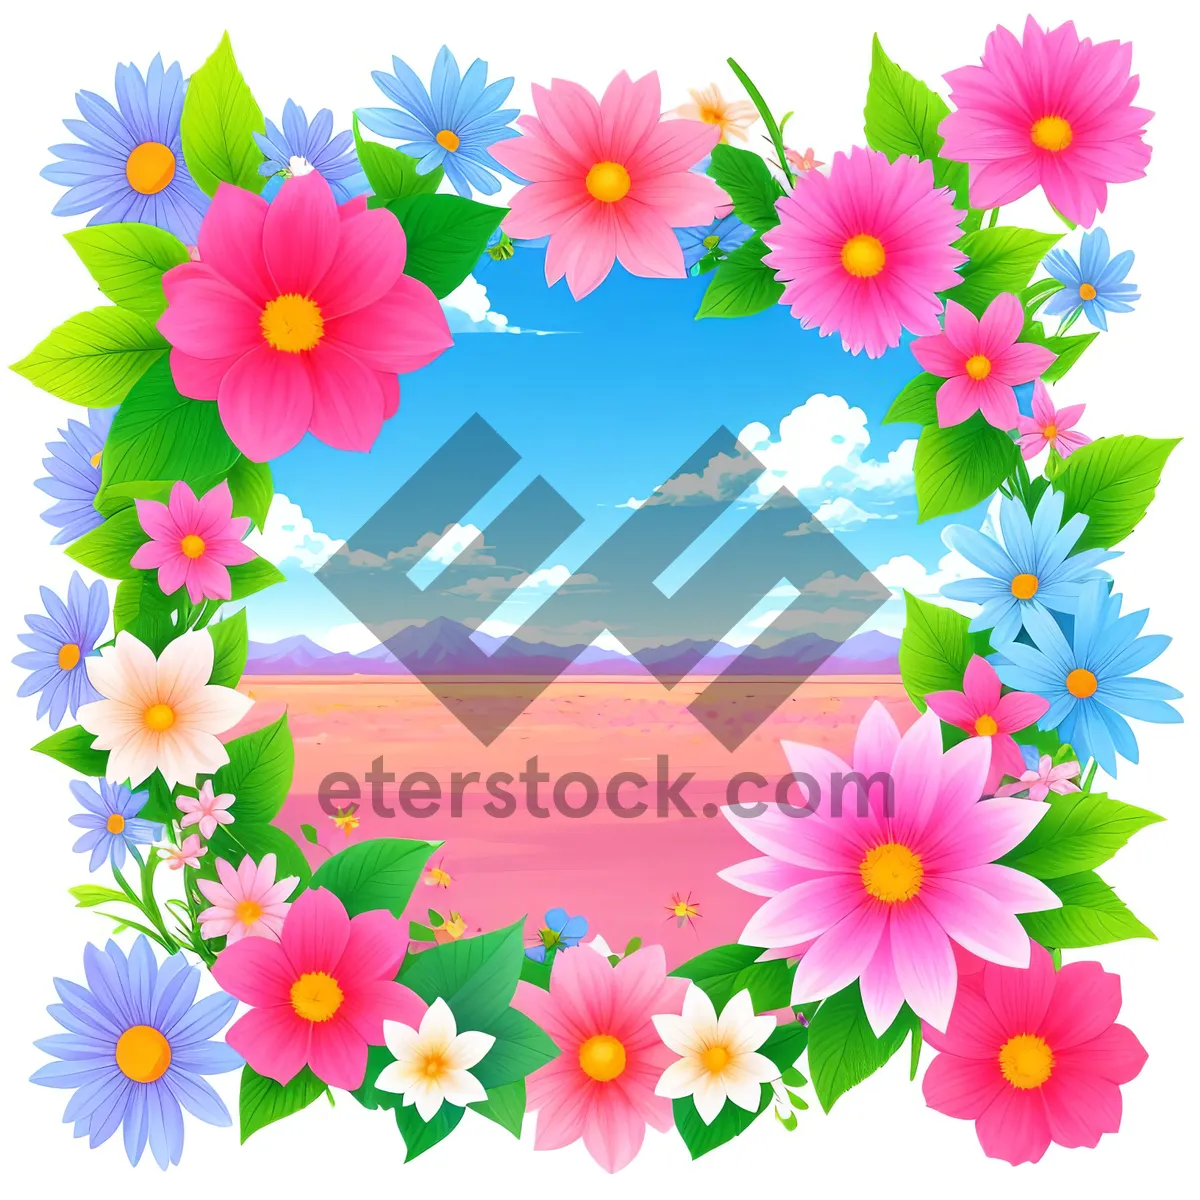 Picture of Blooming Sunflower Bouquet - Vibrant Floral Decoration